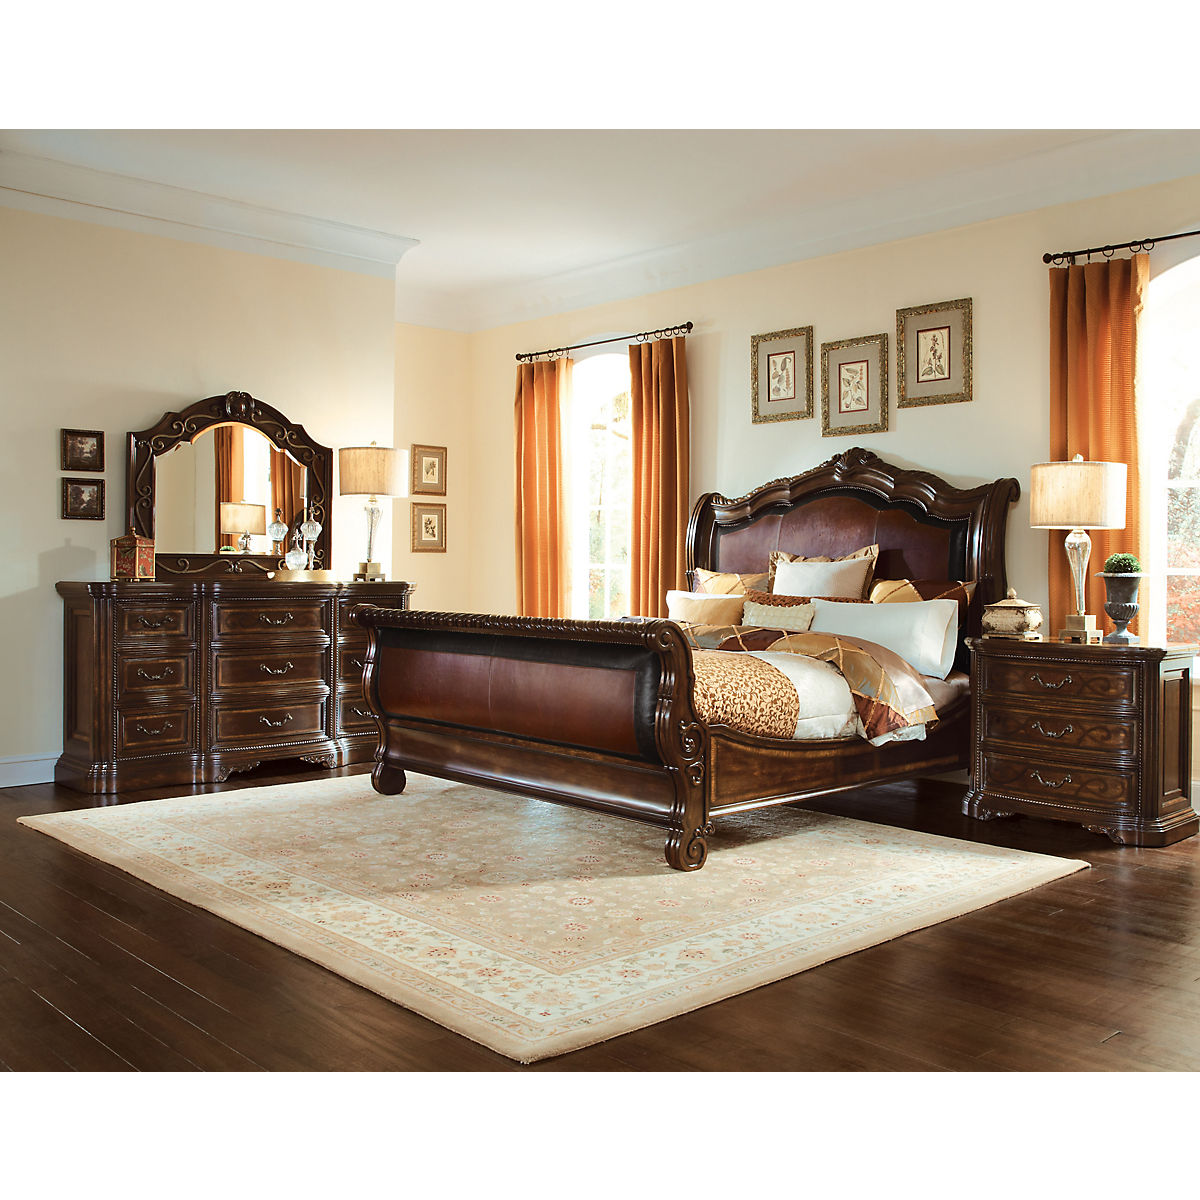 Valencia Leather Sleigh Bed Star, Leather King Sleigh Bed